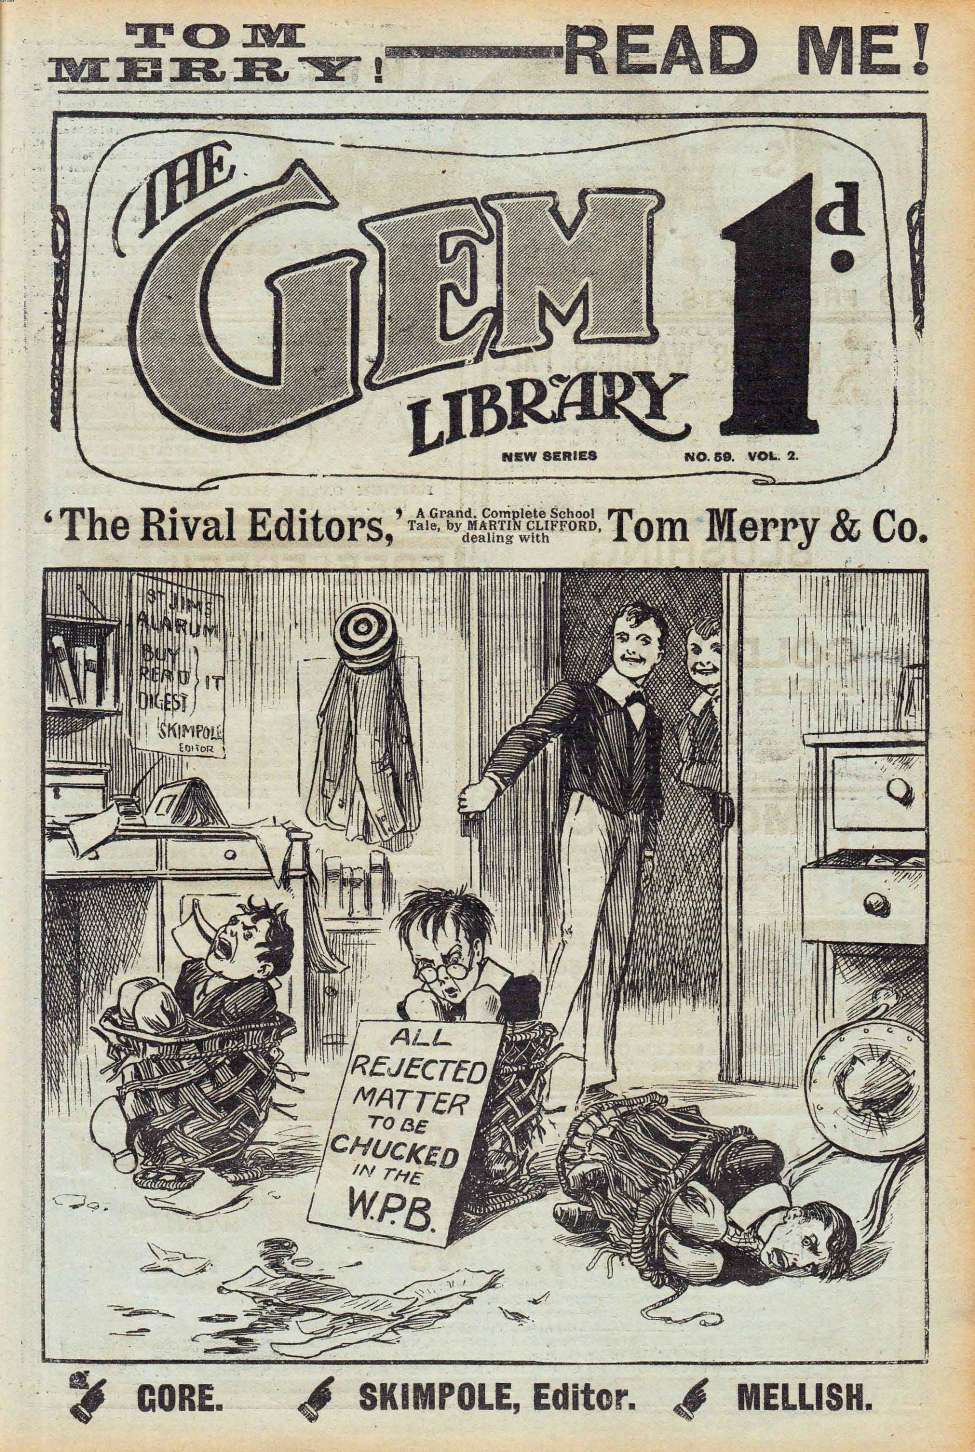 Comic Book Cover For The Gem v2 59 - The Rival Editors